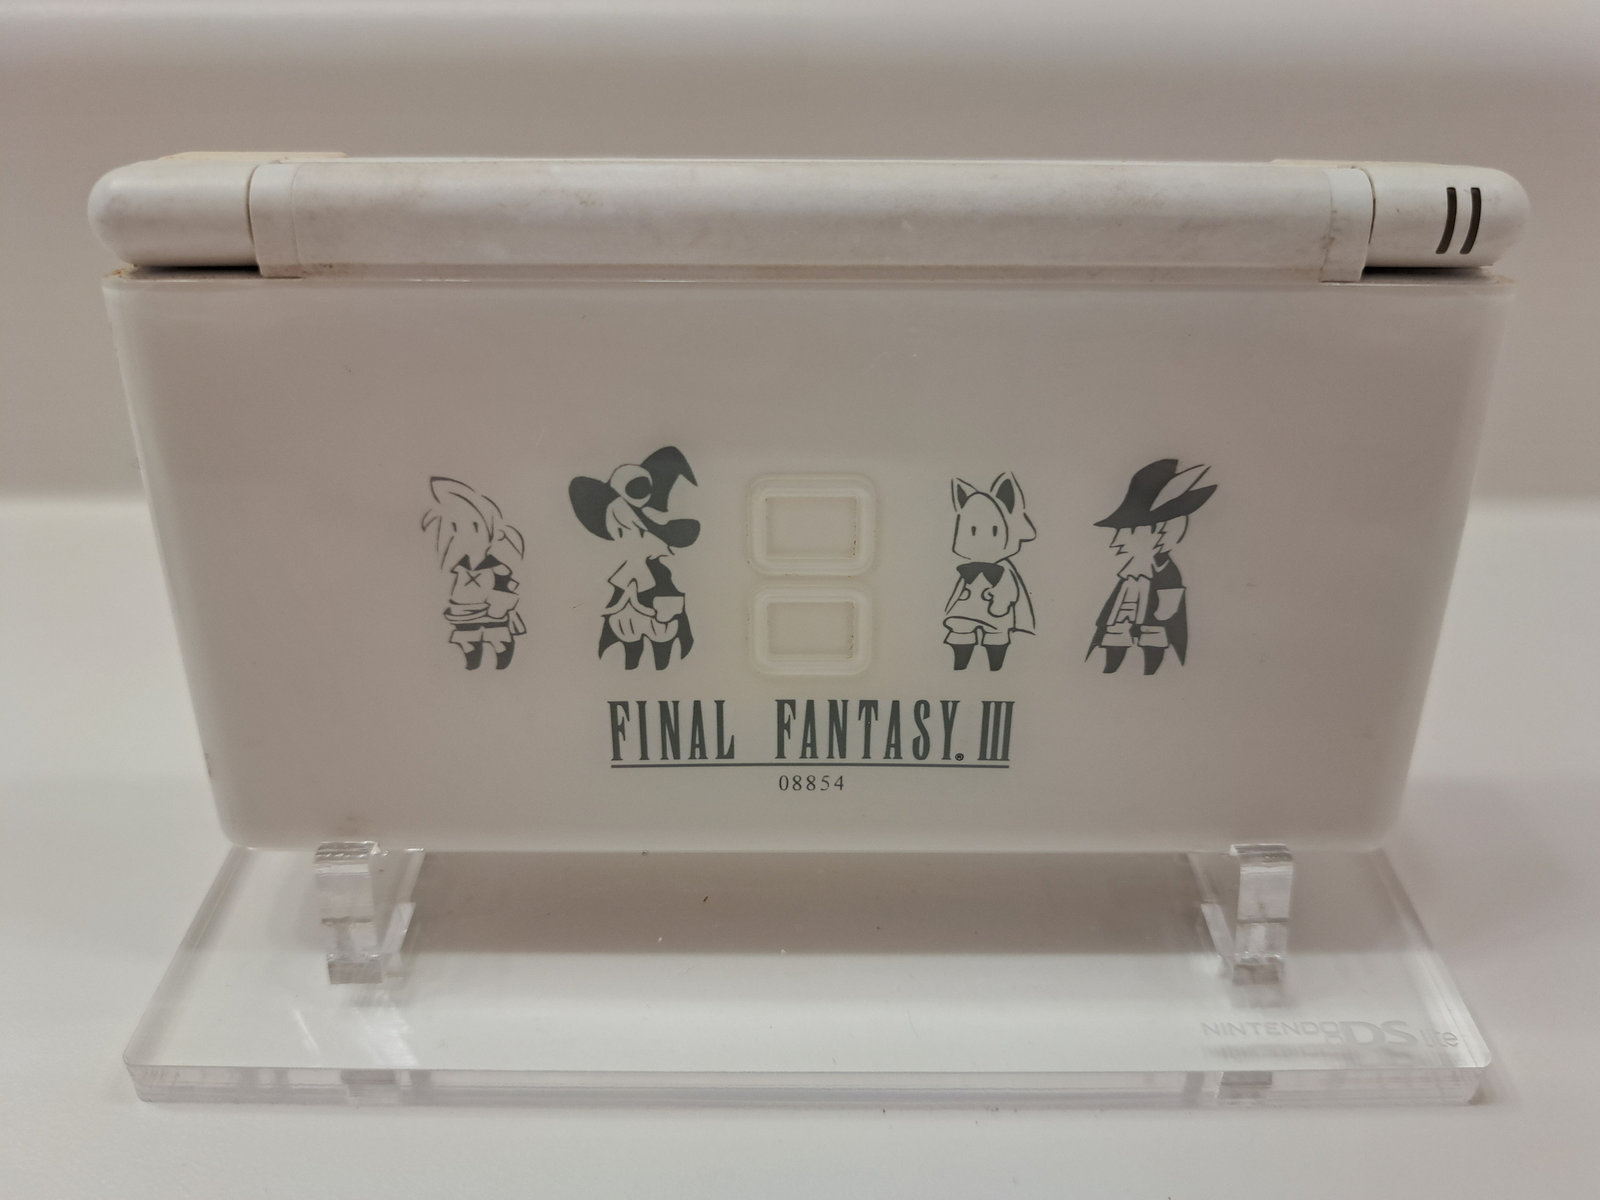 Authentic Nintendo DS Lite Console With Charger Final Fantasy III limited Editio - $149.95